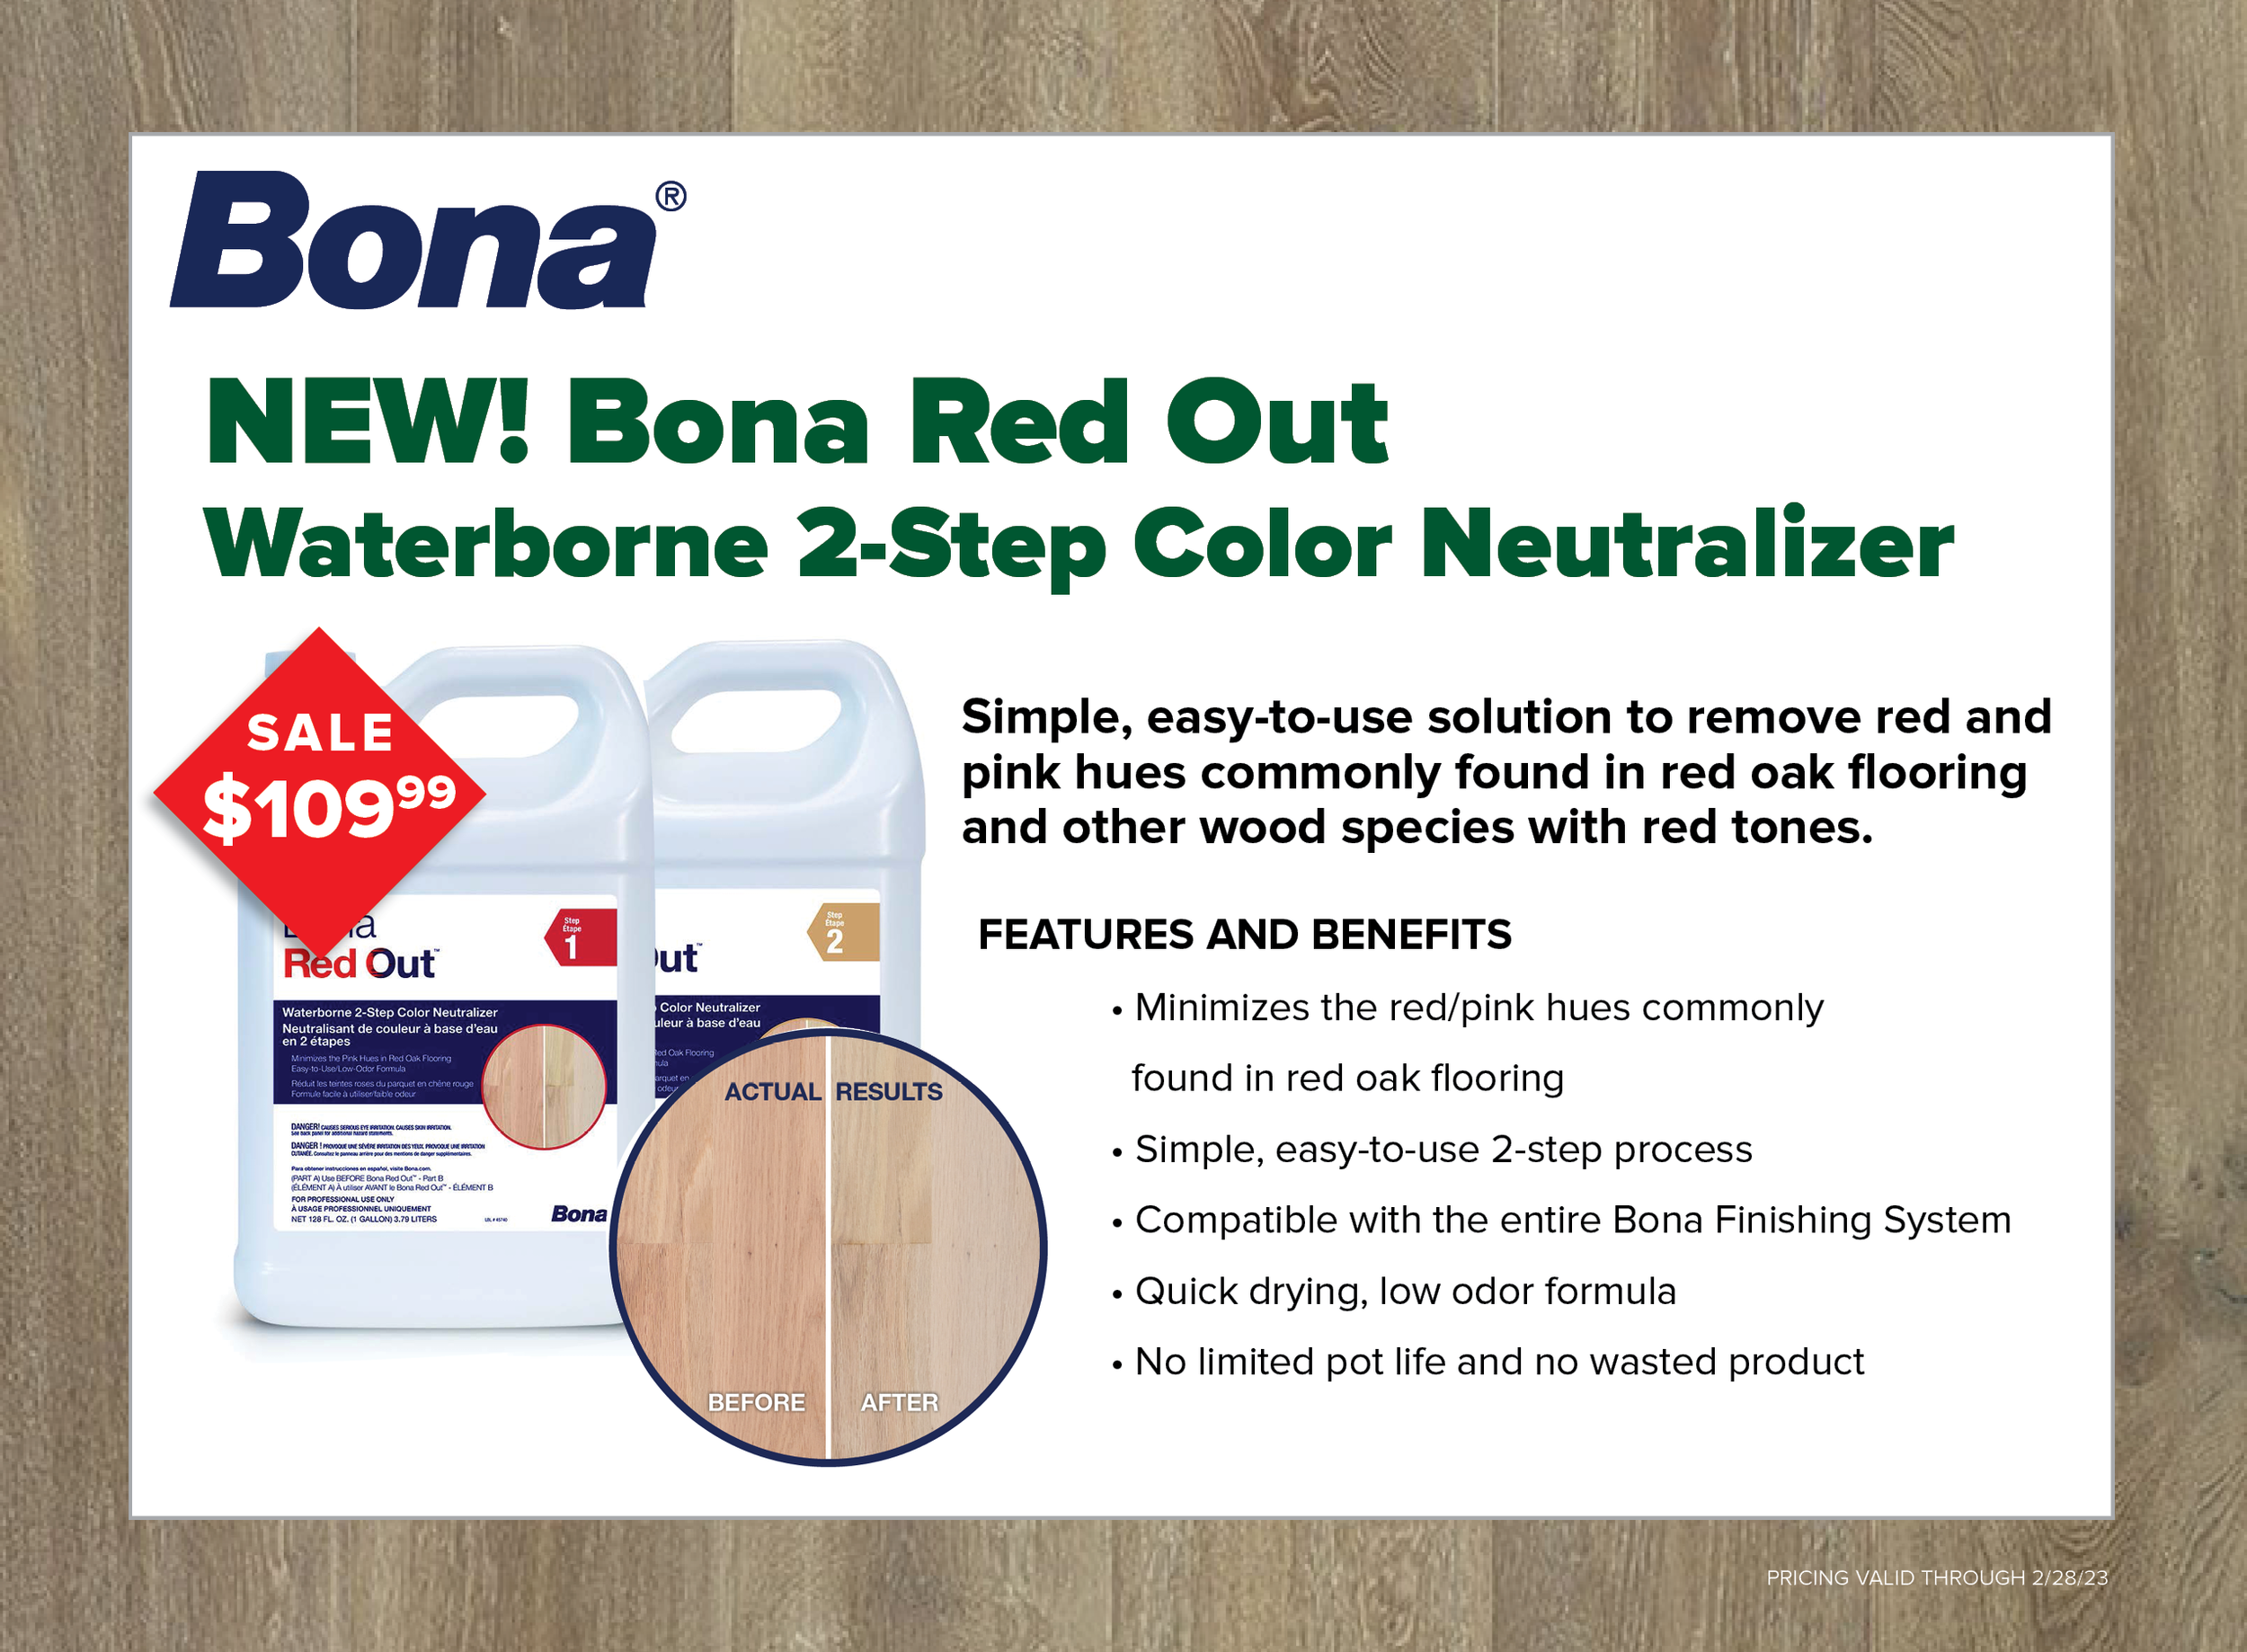 Bona Red Out Promo.png